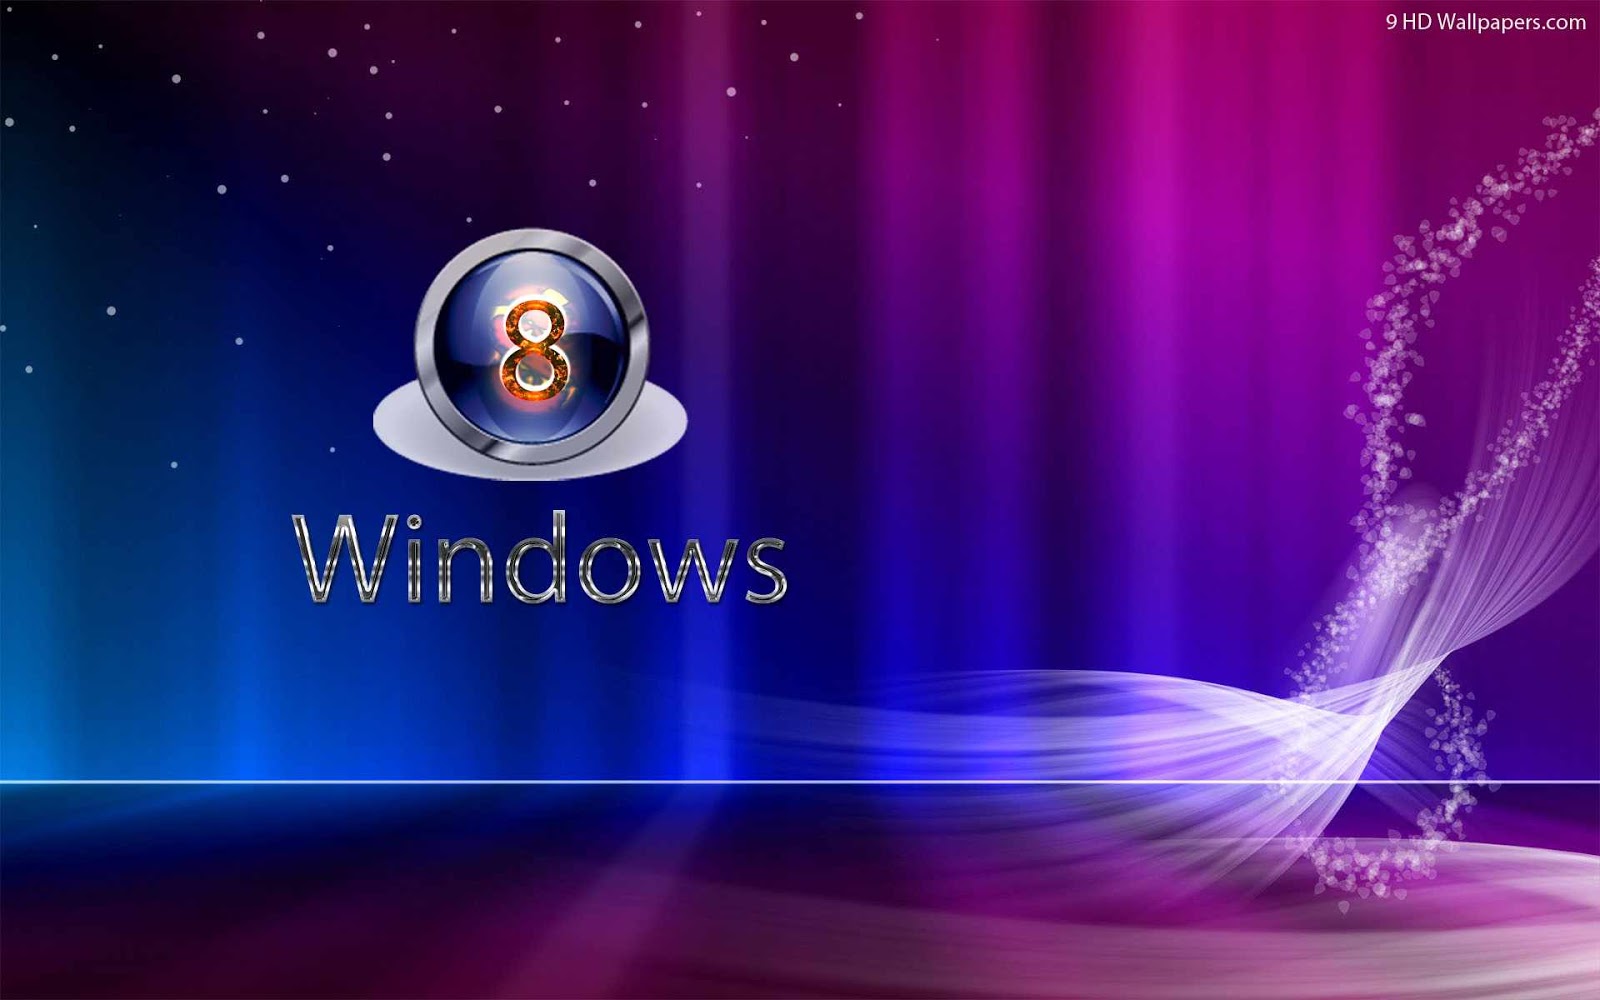 computer wallpaper free download for windows xp